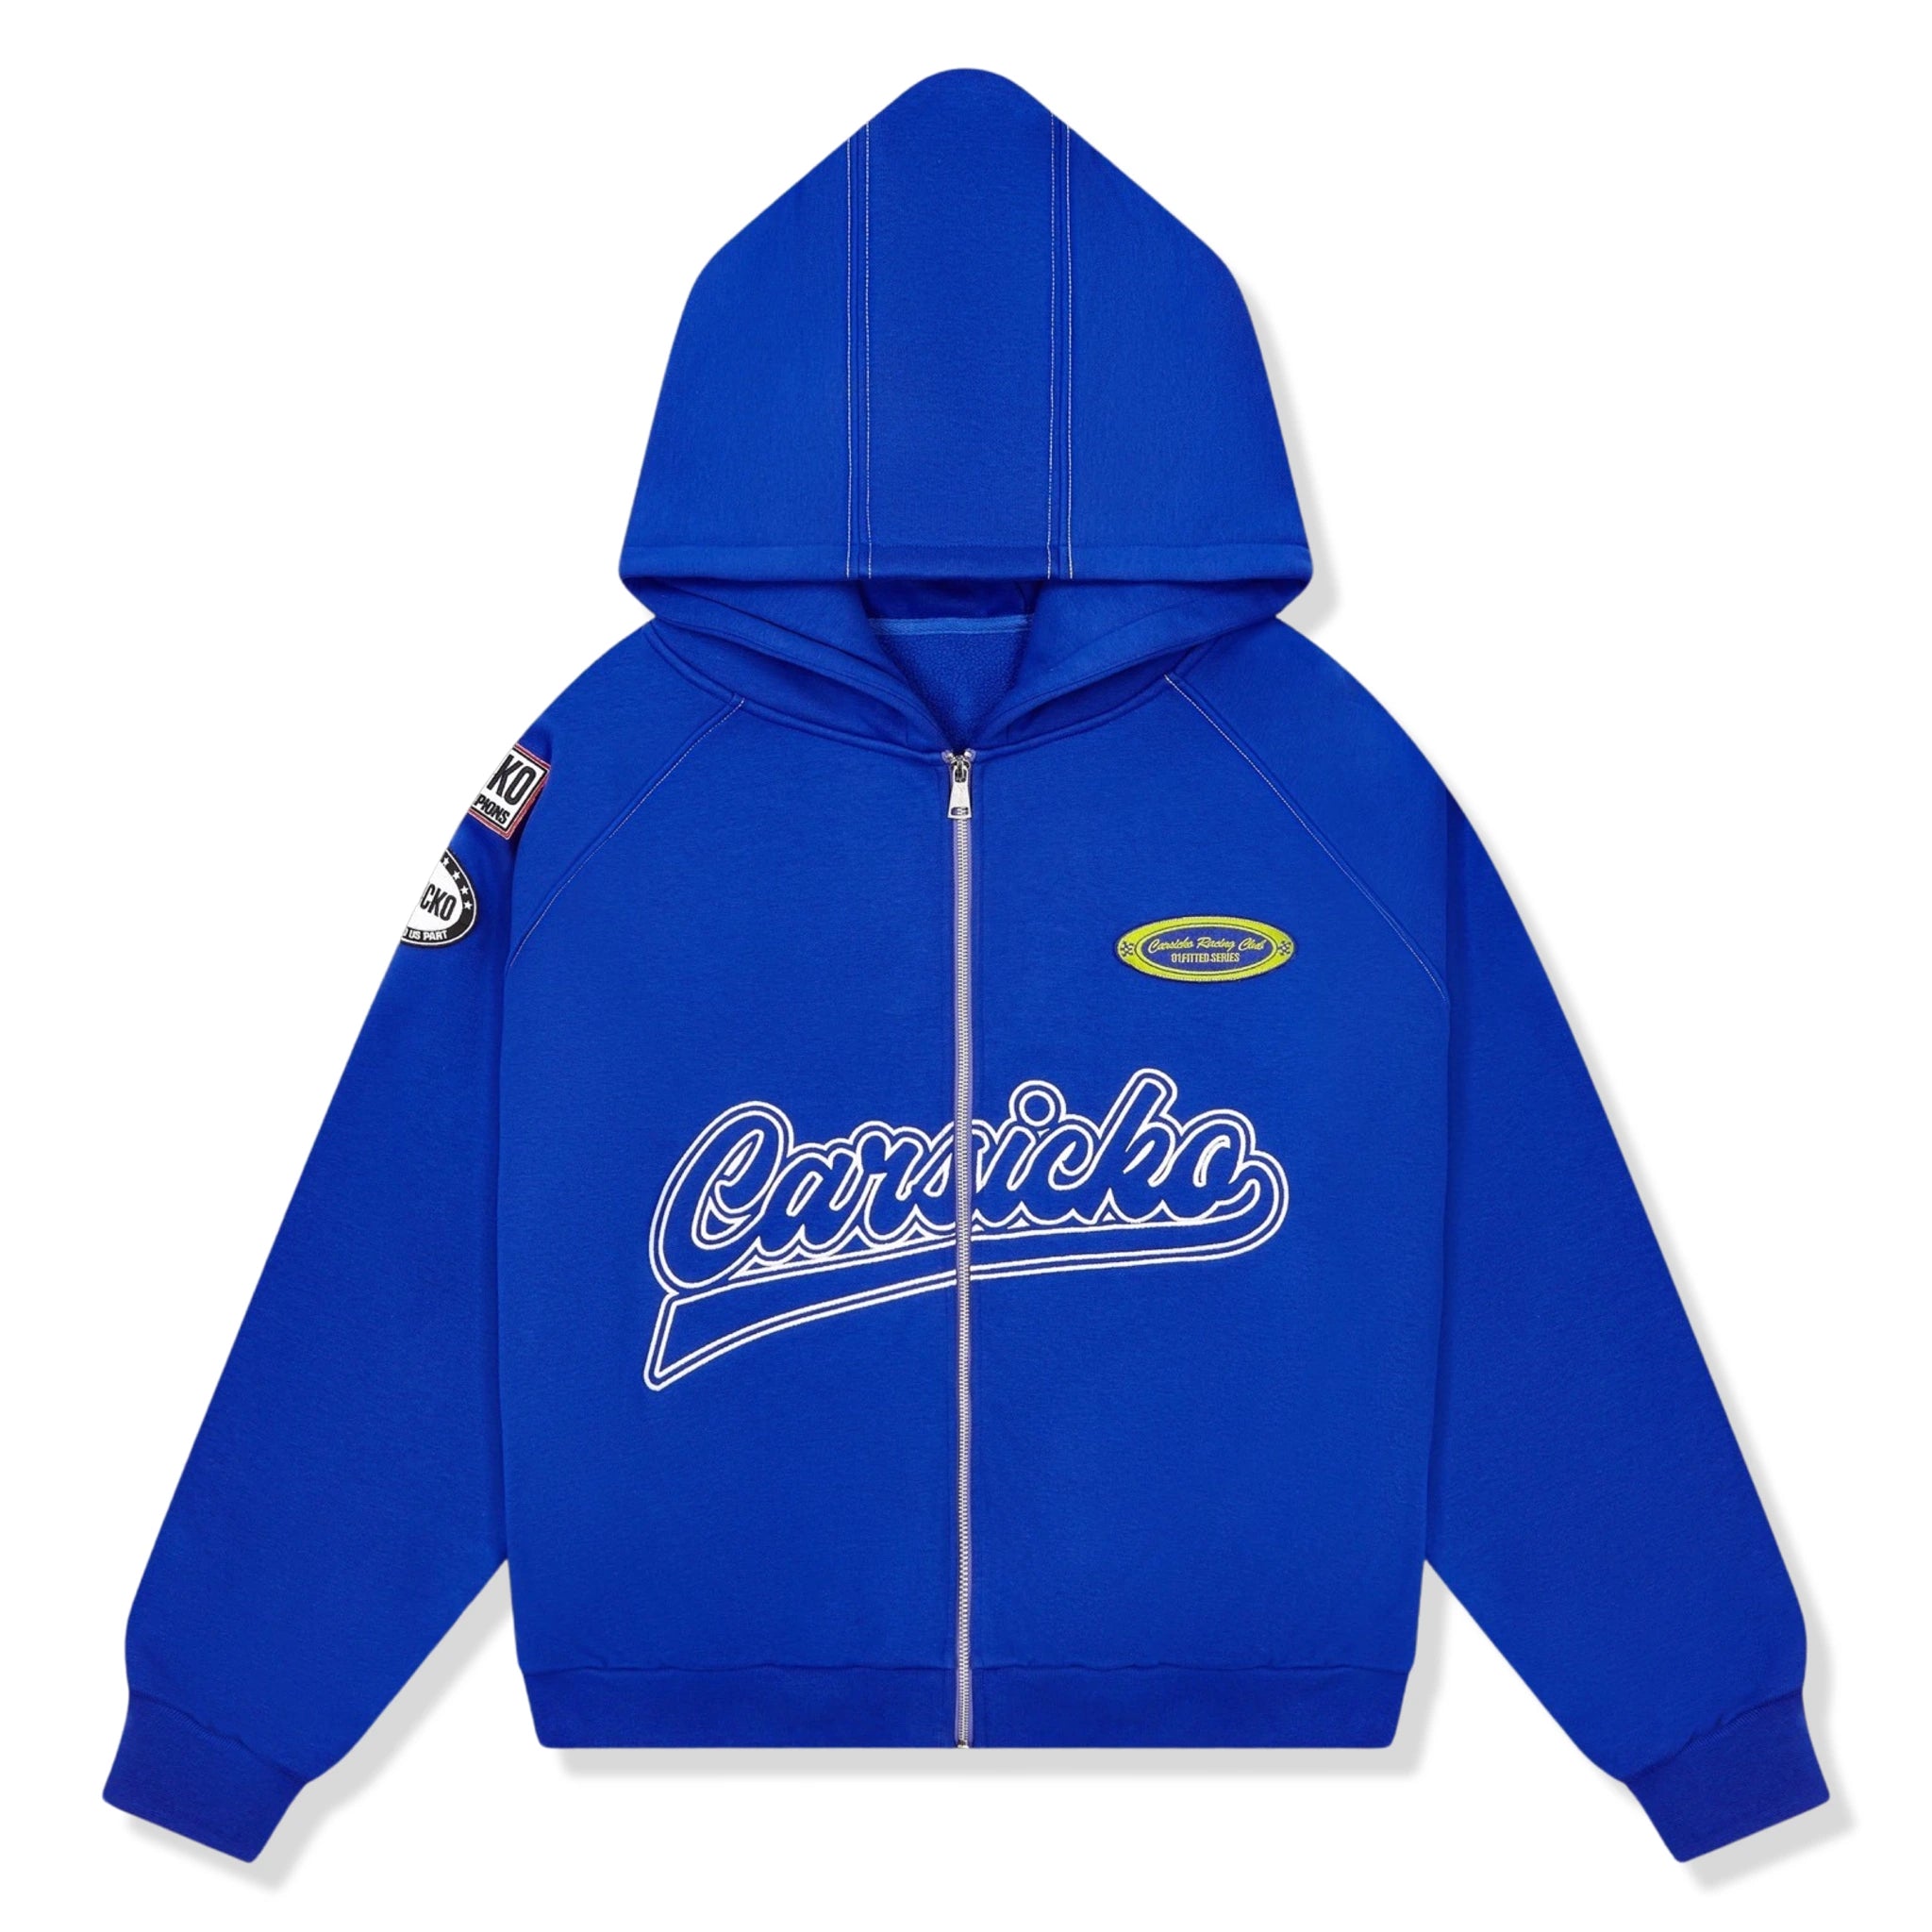 Front view of Carsicko Racing Club Zip-Up Blue Hoodie